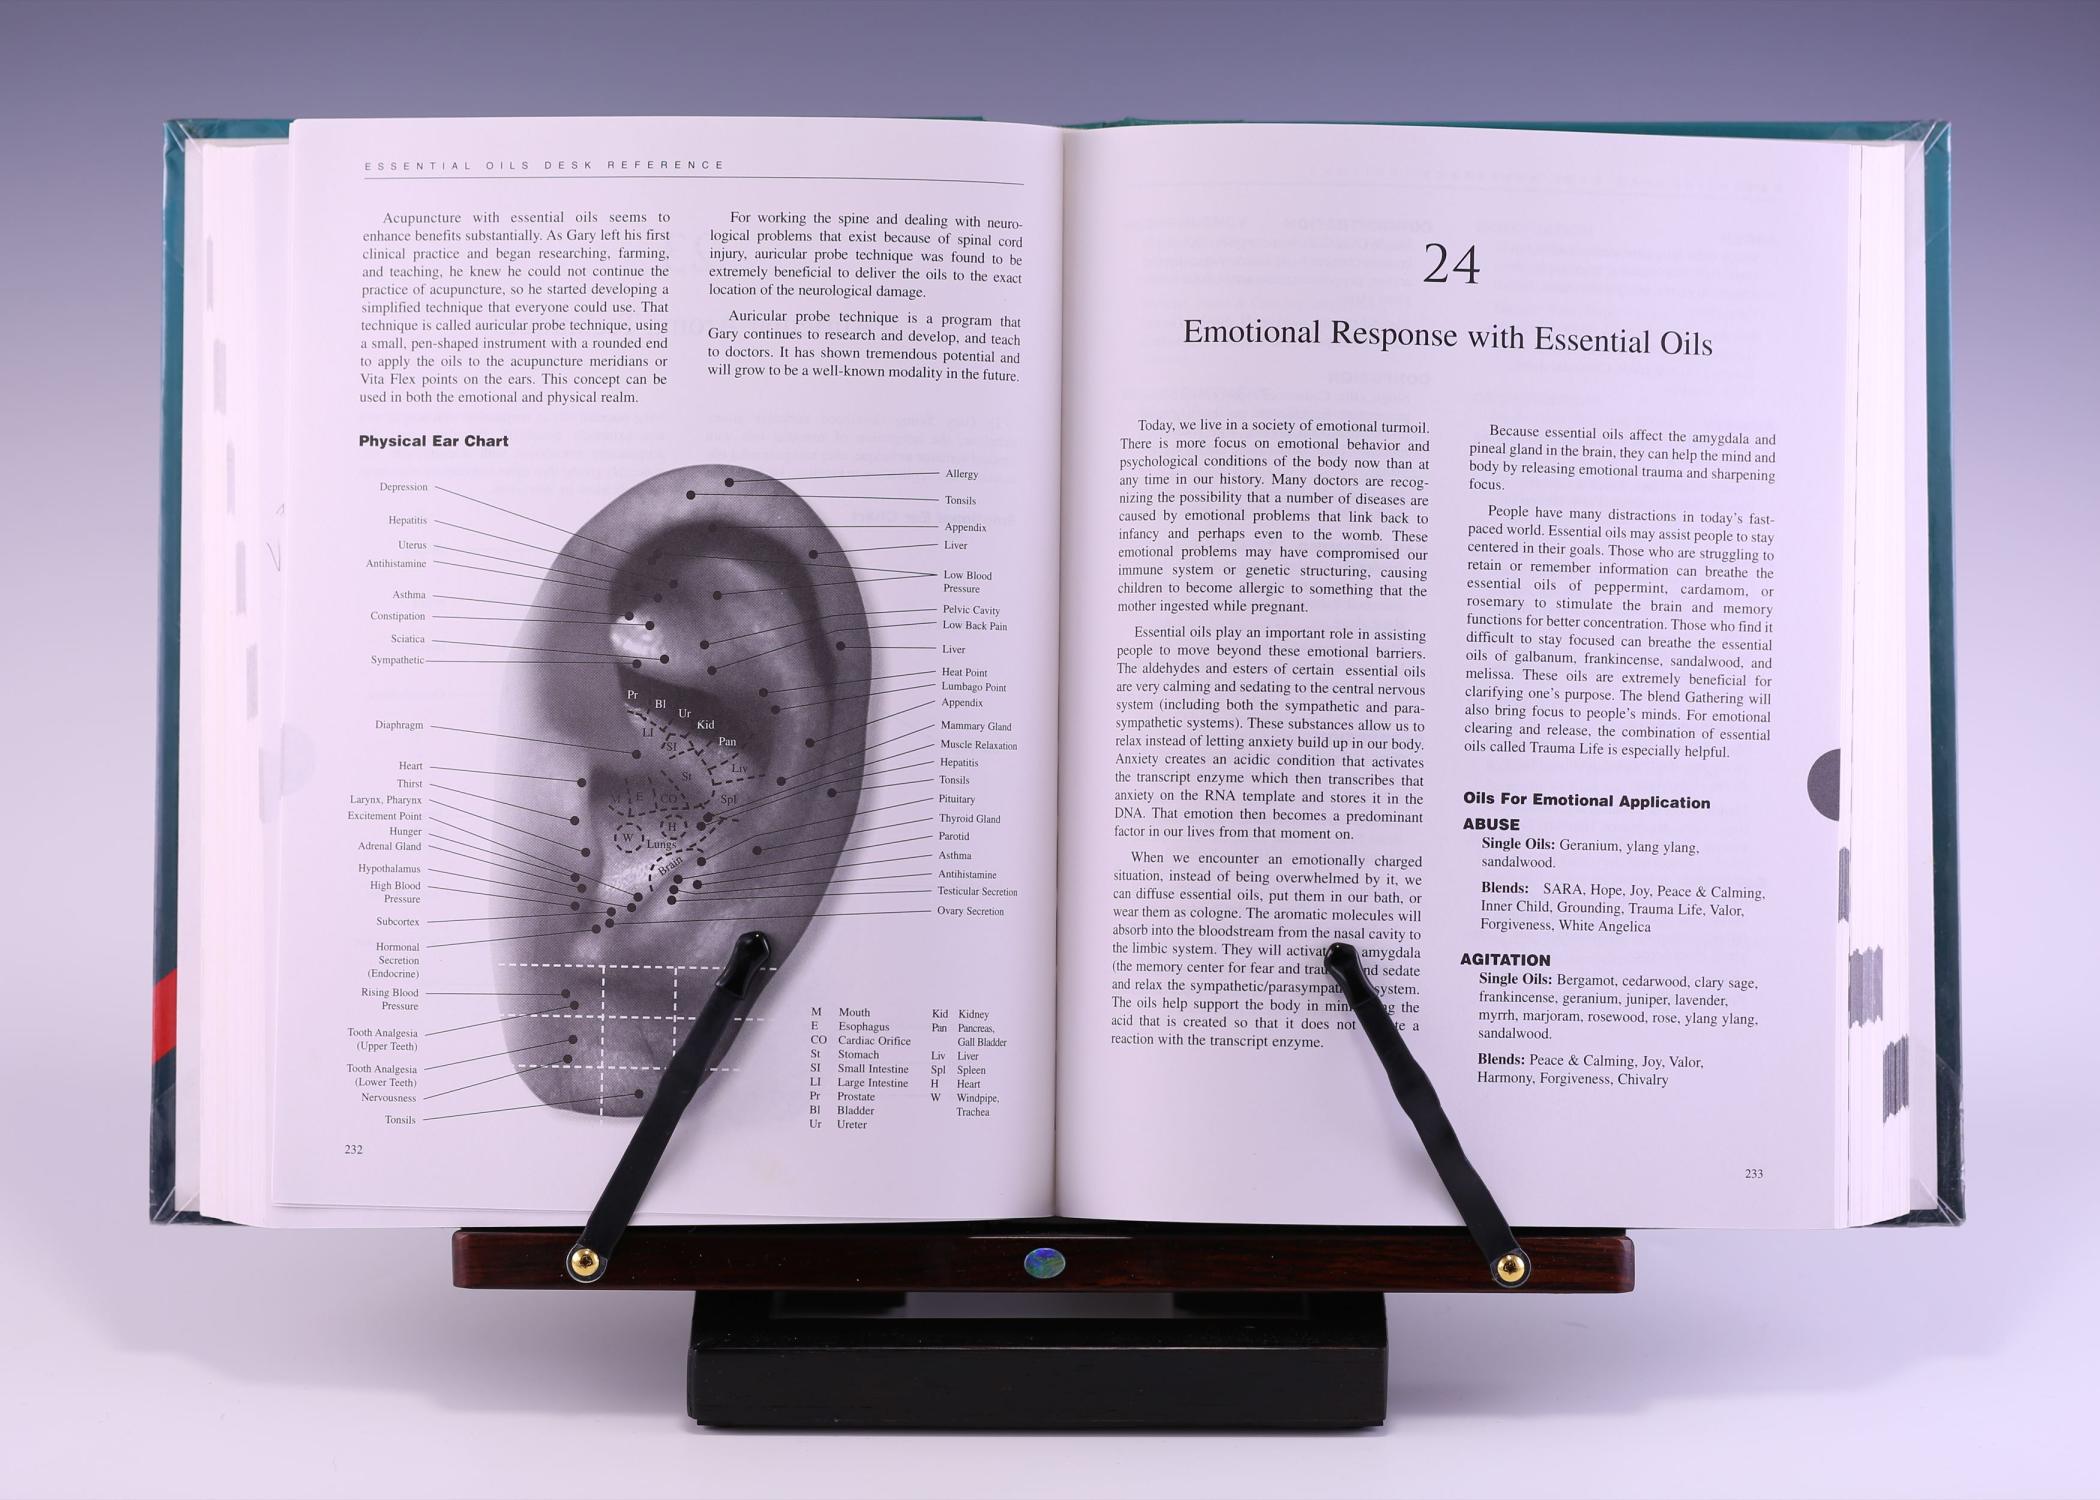 Essential Oils Desk Reference 3rd Edition Essential Science